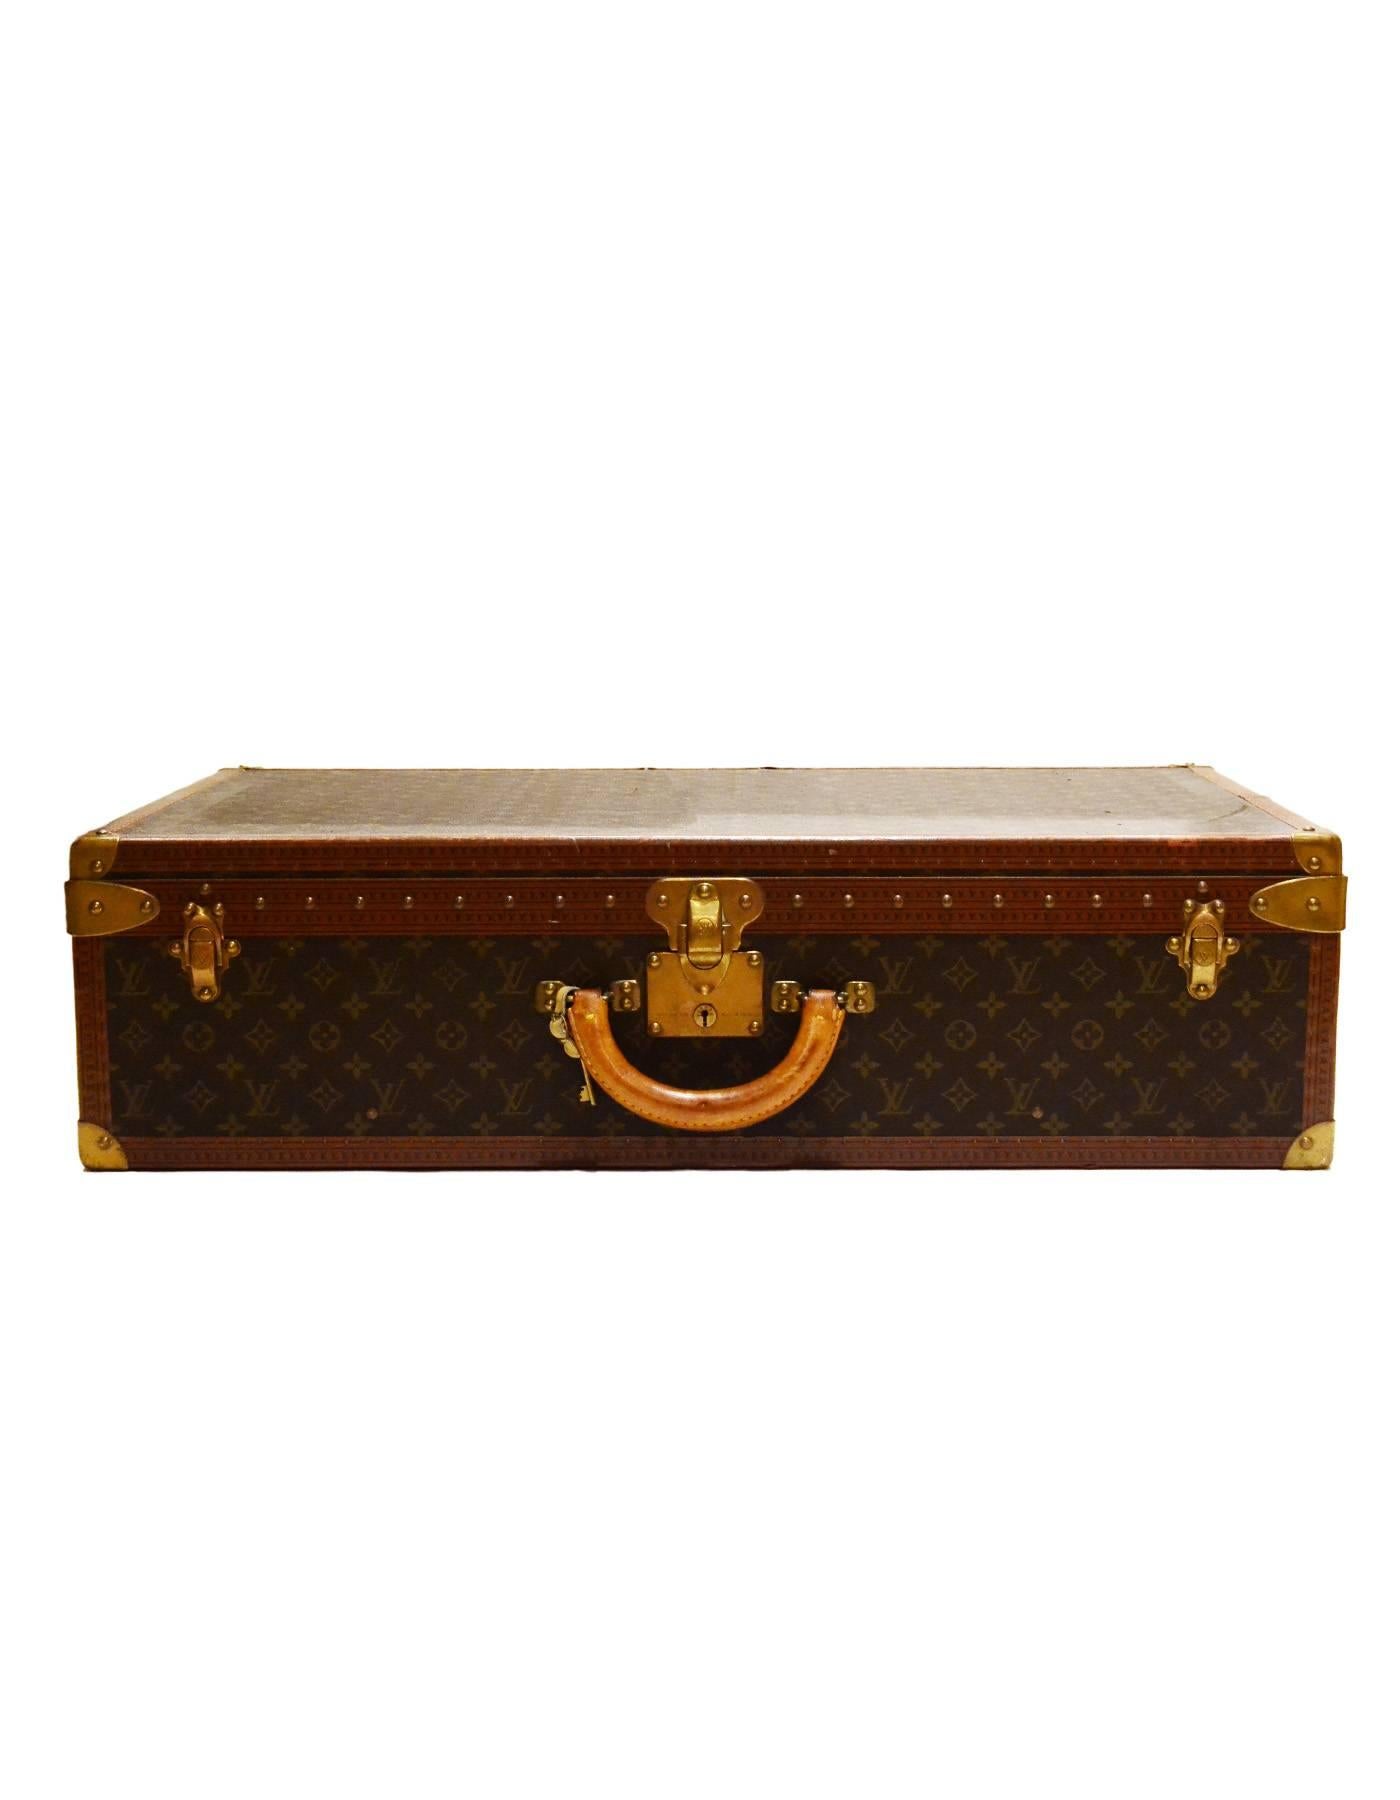 Louis Vuitton Vintage Monogram Hard Suitcase
Features removable insert/tray

Made In: France
Color: Brown and tan
Hardware: Brass
Materials: Metal, leather and coated canvas
Lining: Nude leather
Closure/Opening: Triple trunk latch closure with key